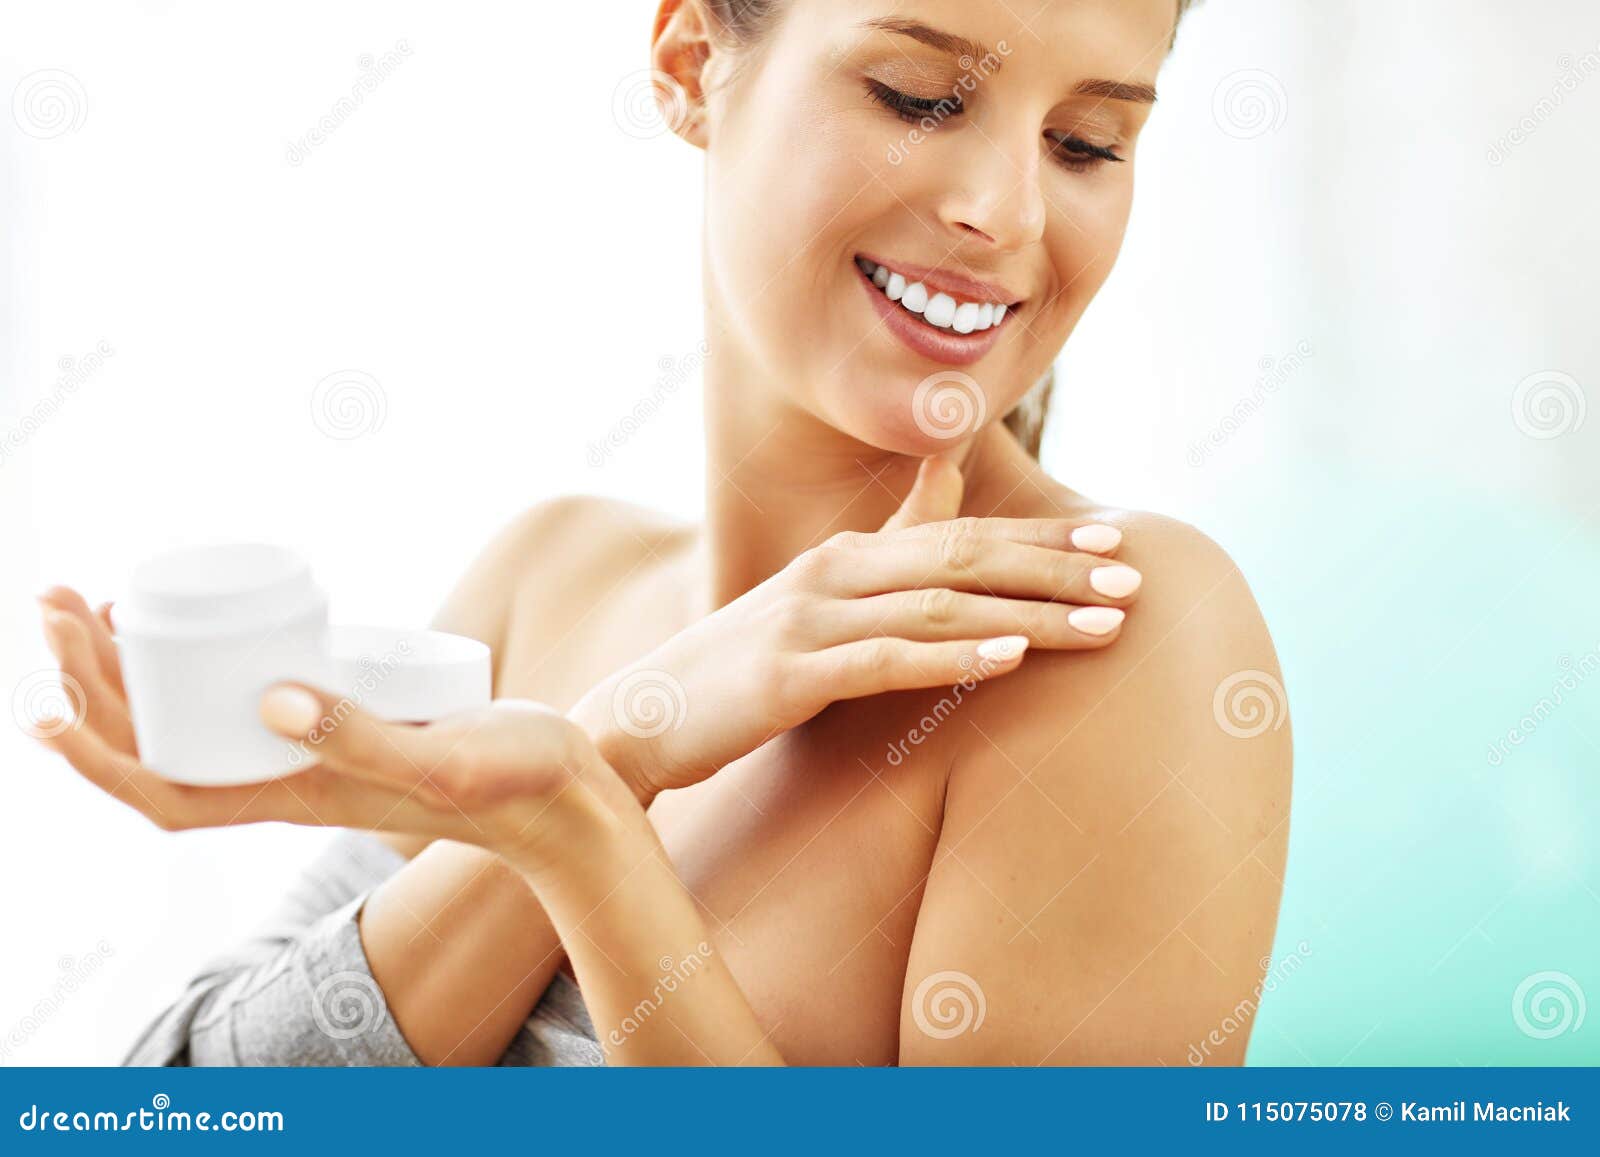 woman using body lotion on her skin